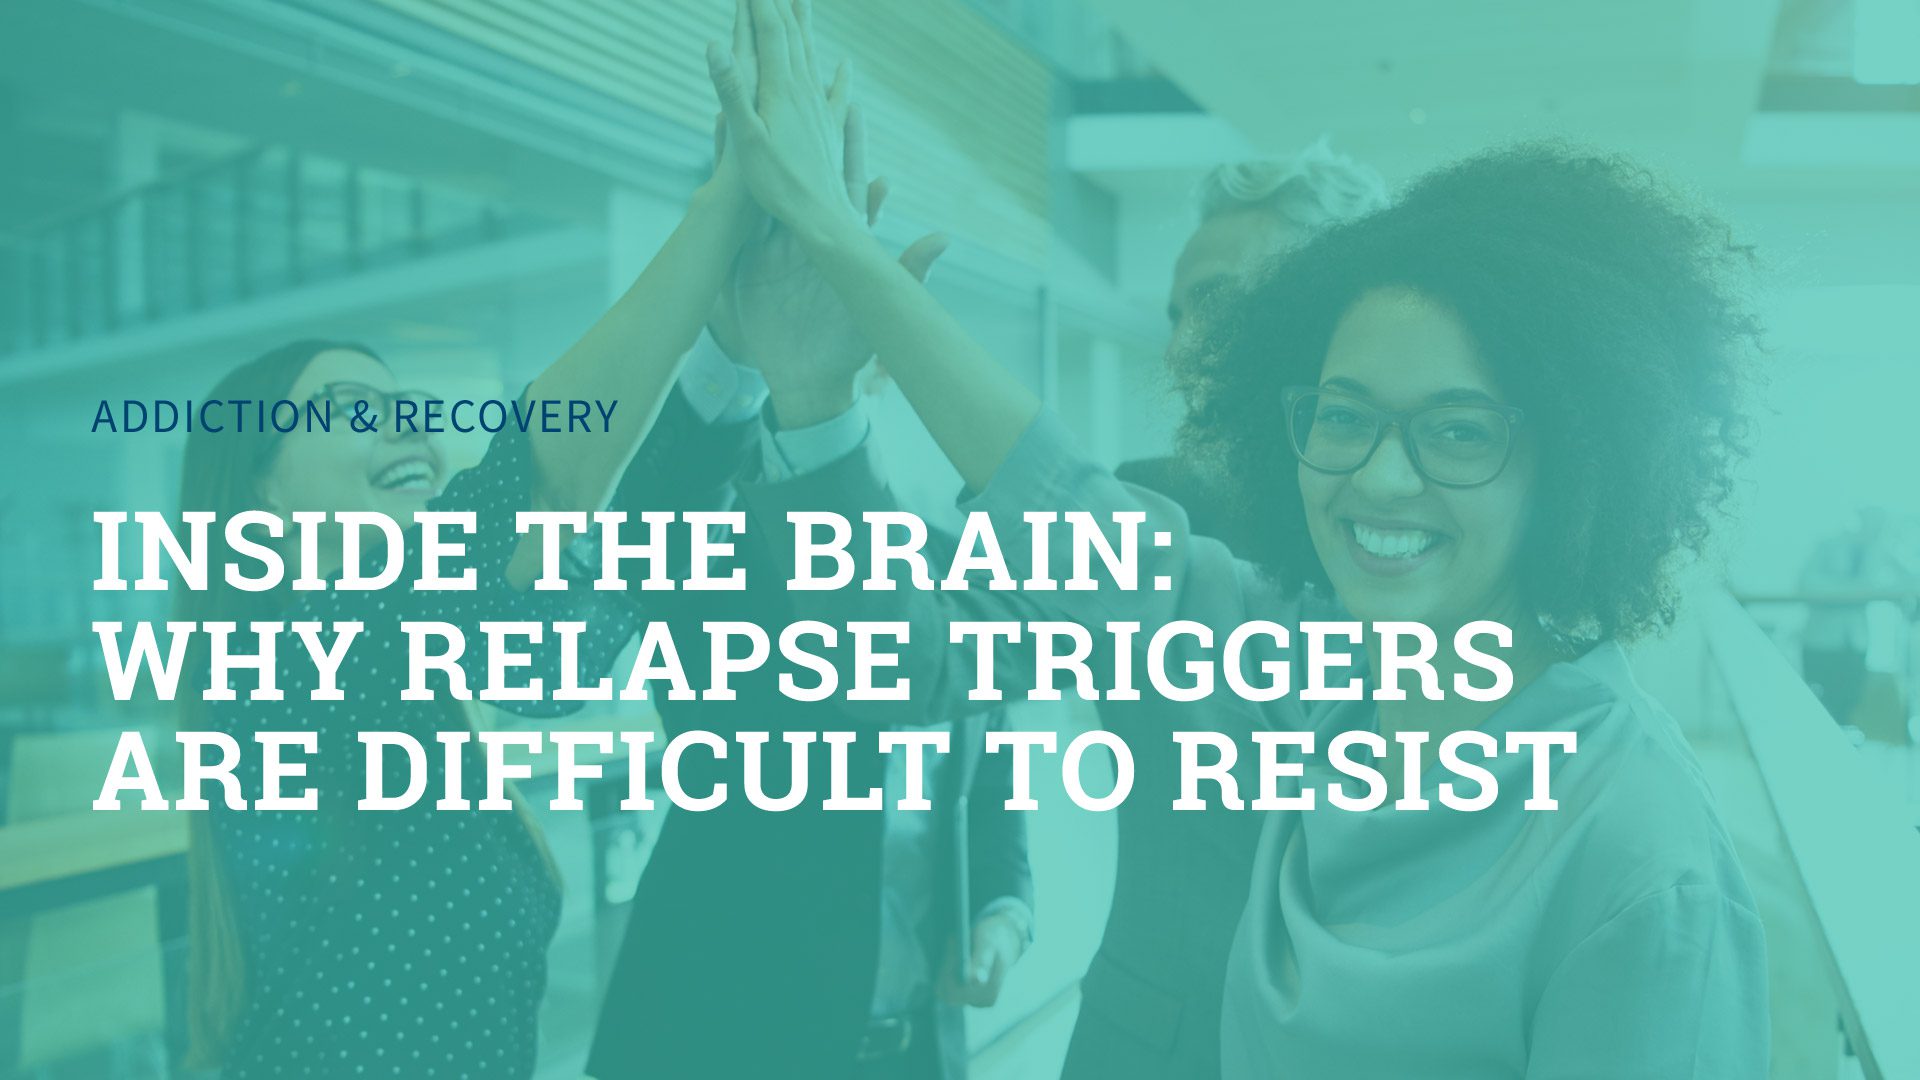 Inside the Brain: Why Relapse Triggers are Difficult to Resist